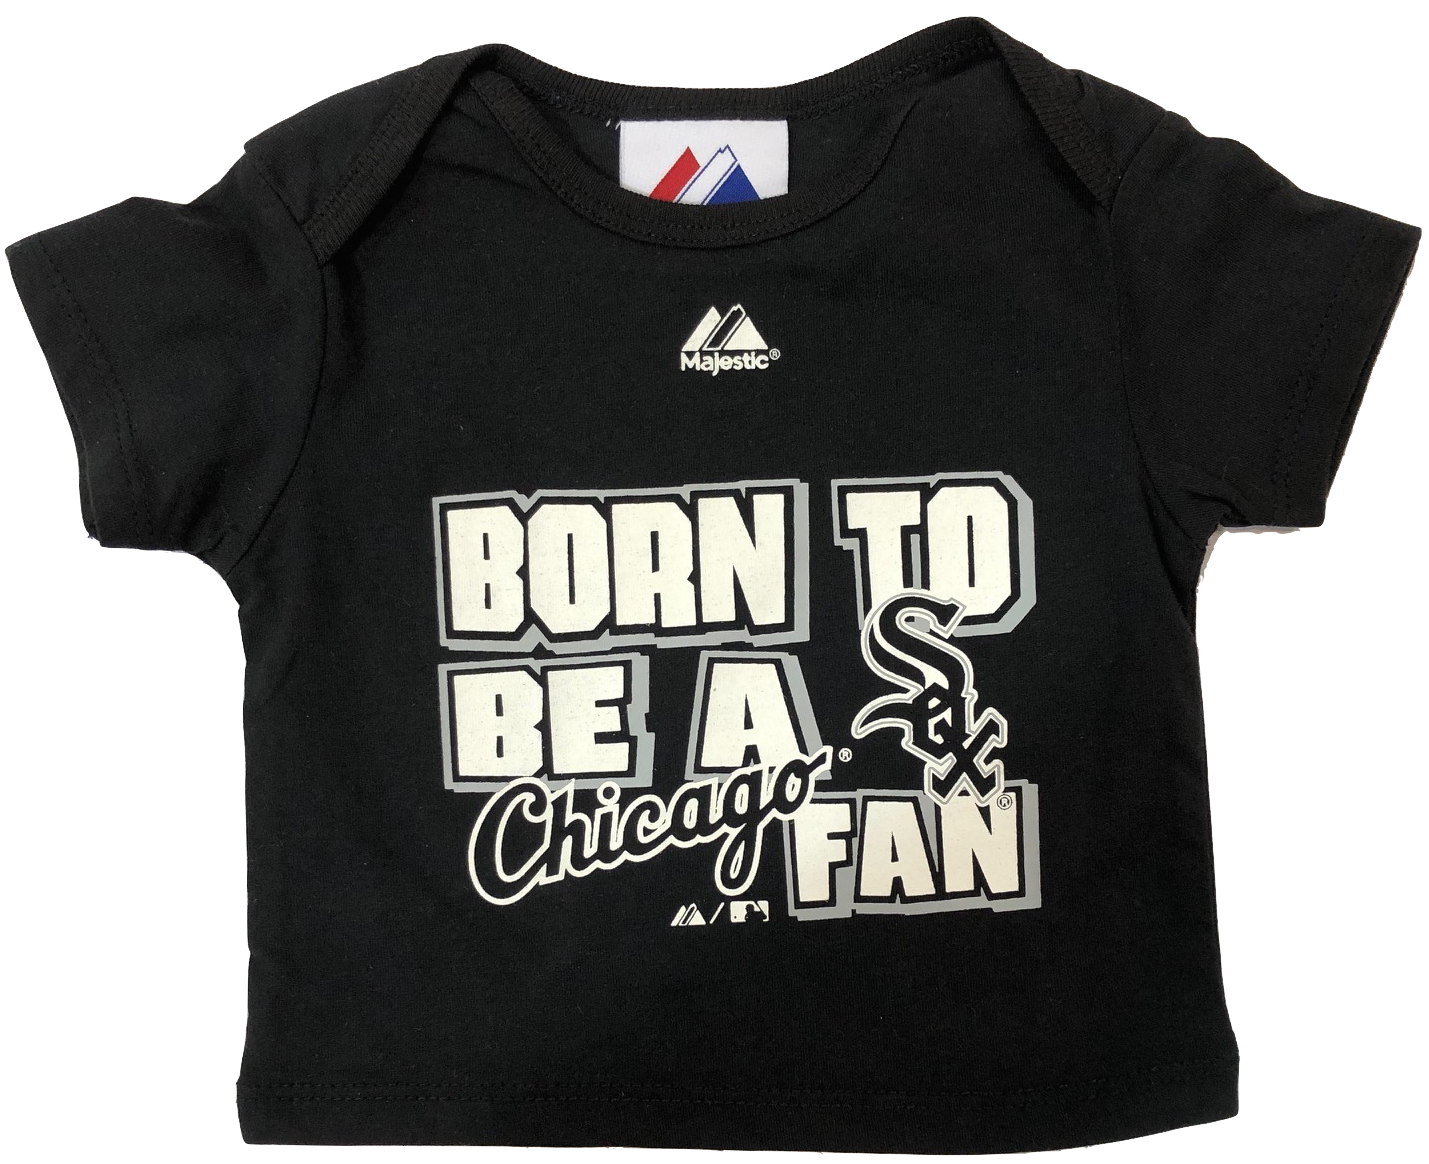 Chicago White Sox "BORN TO BE" Infant T-Shirt